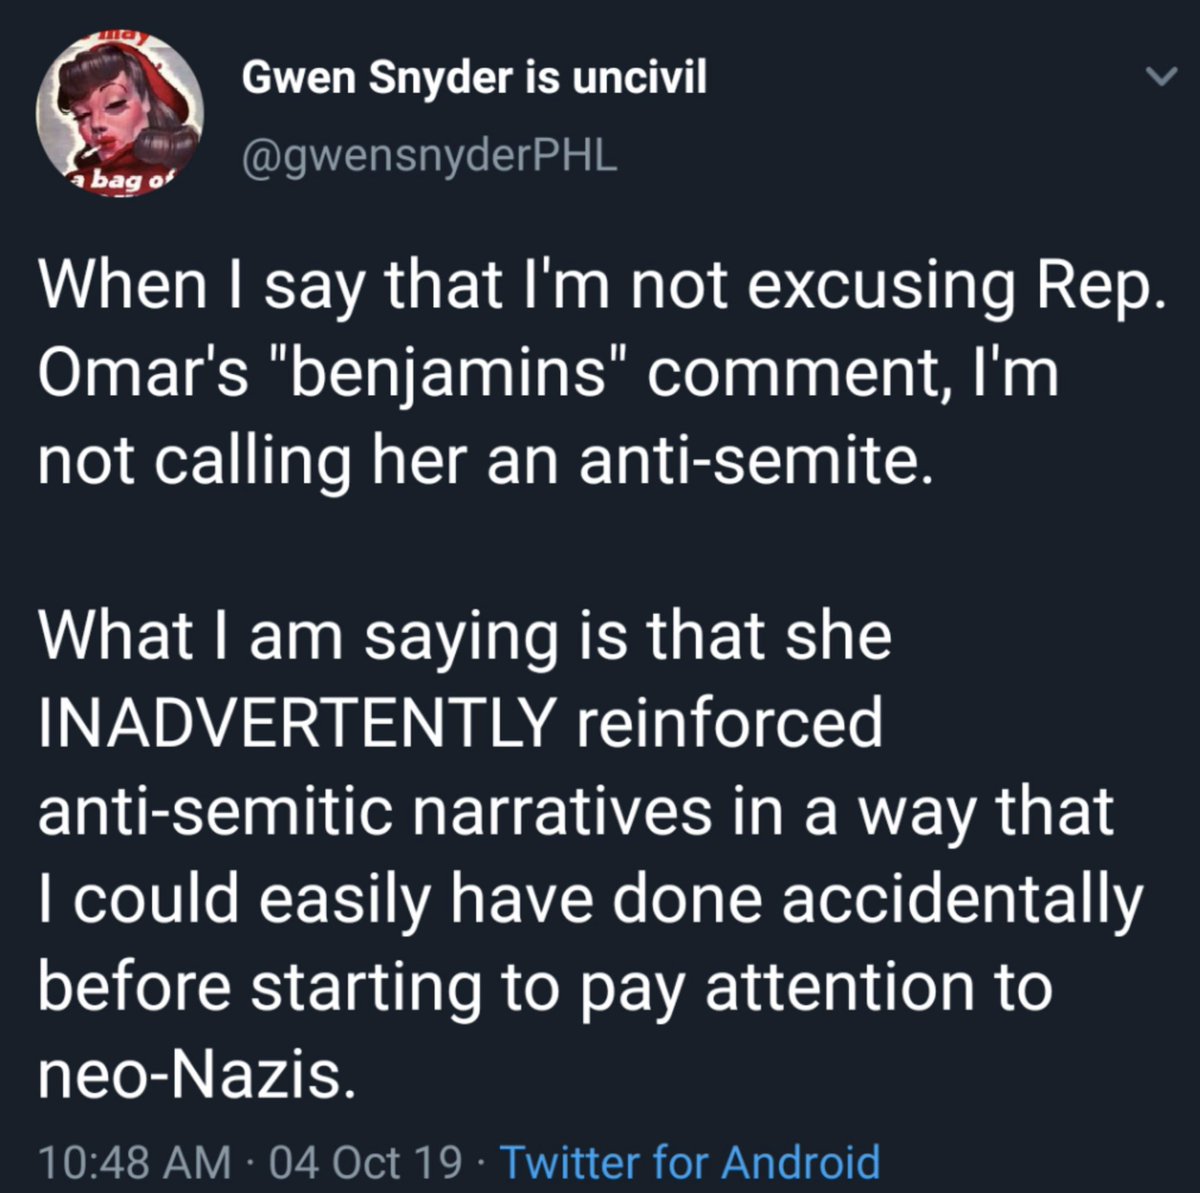 And since people are excitedly sharing decontextualized screenshots of me saying-- seven months after the initial incident, and in defense of Ilhan Omar-- that Ilhan Omar's is not an antisemite, but that her "Benjamins" tweet inadvertently invoked an antisemitic trope...